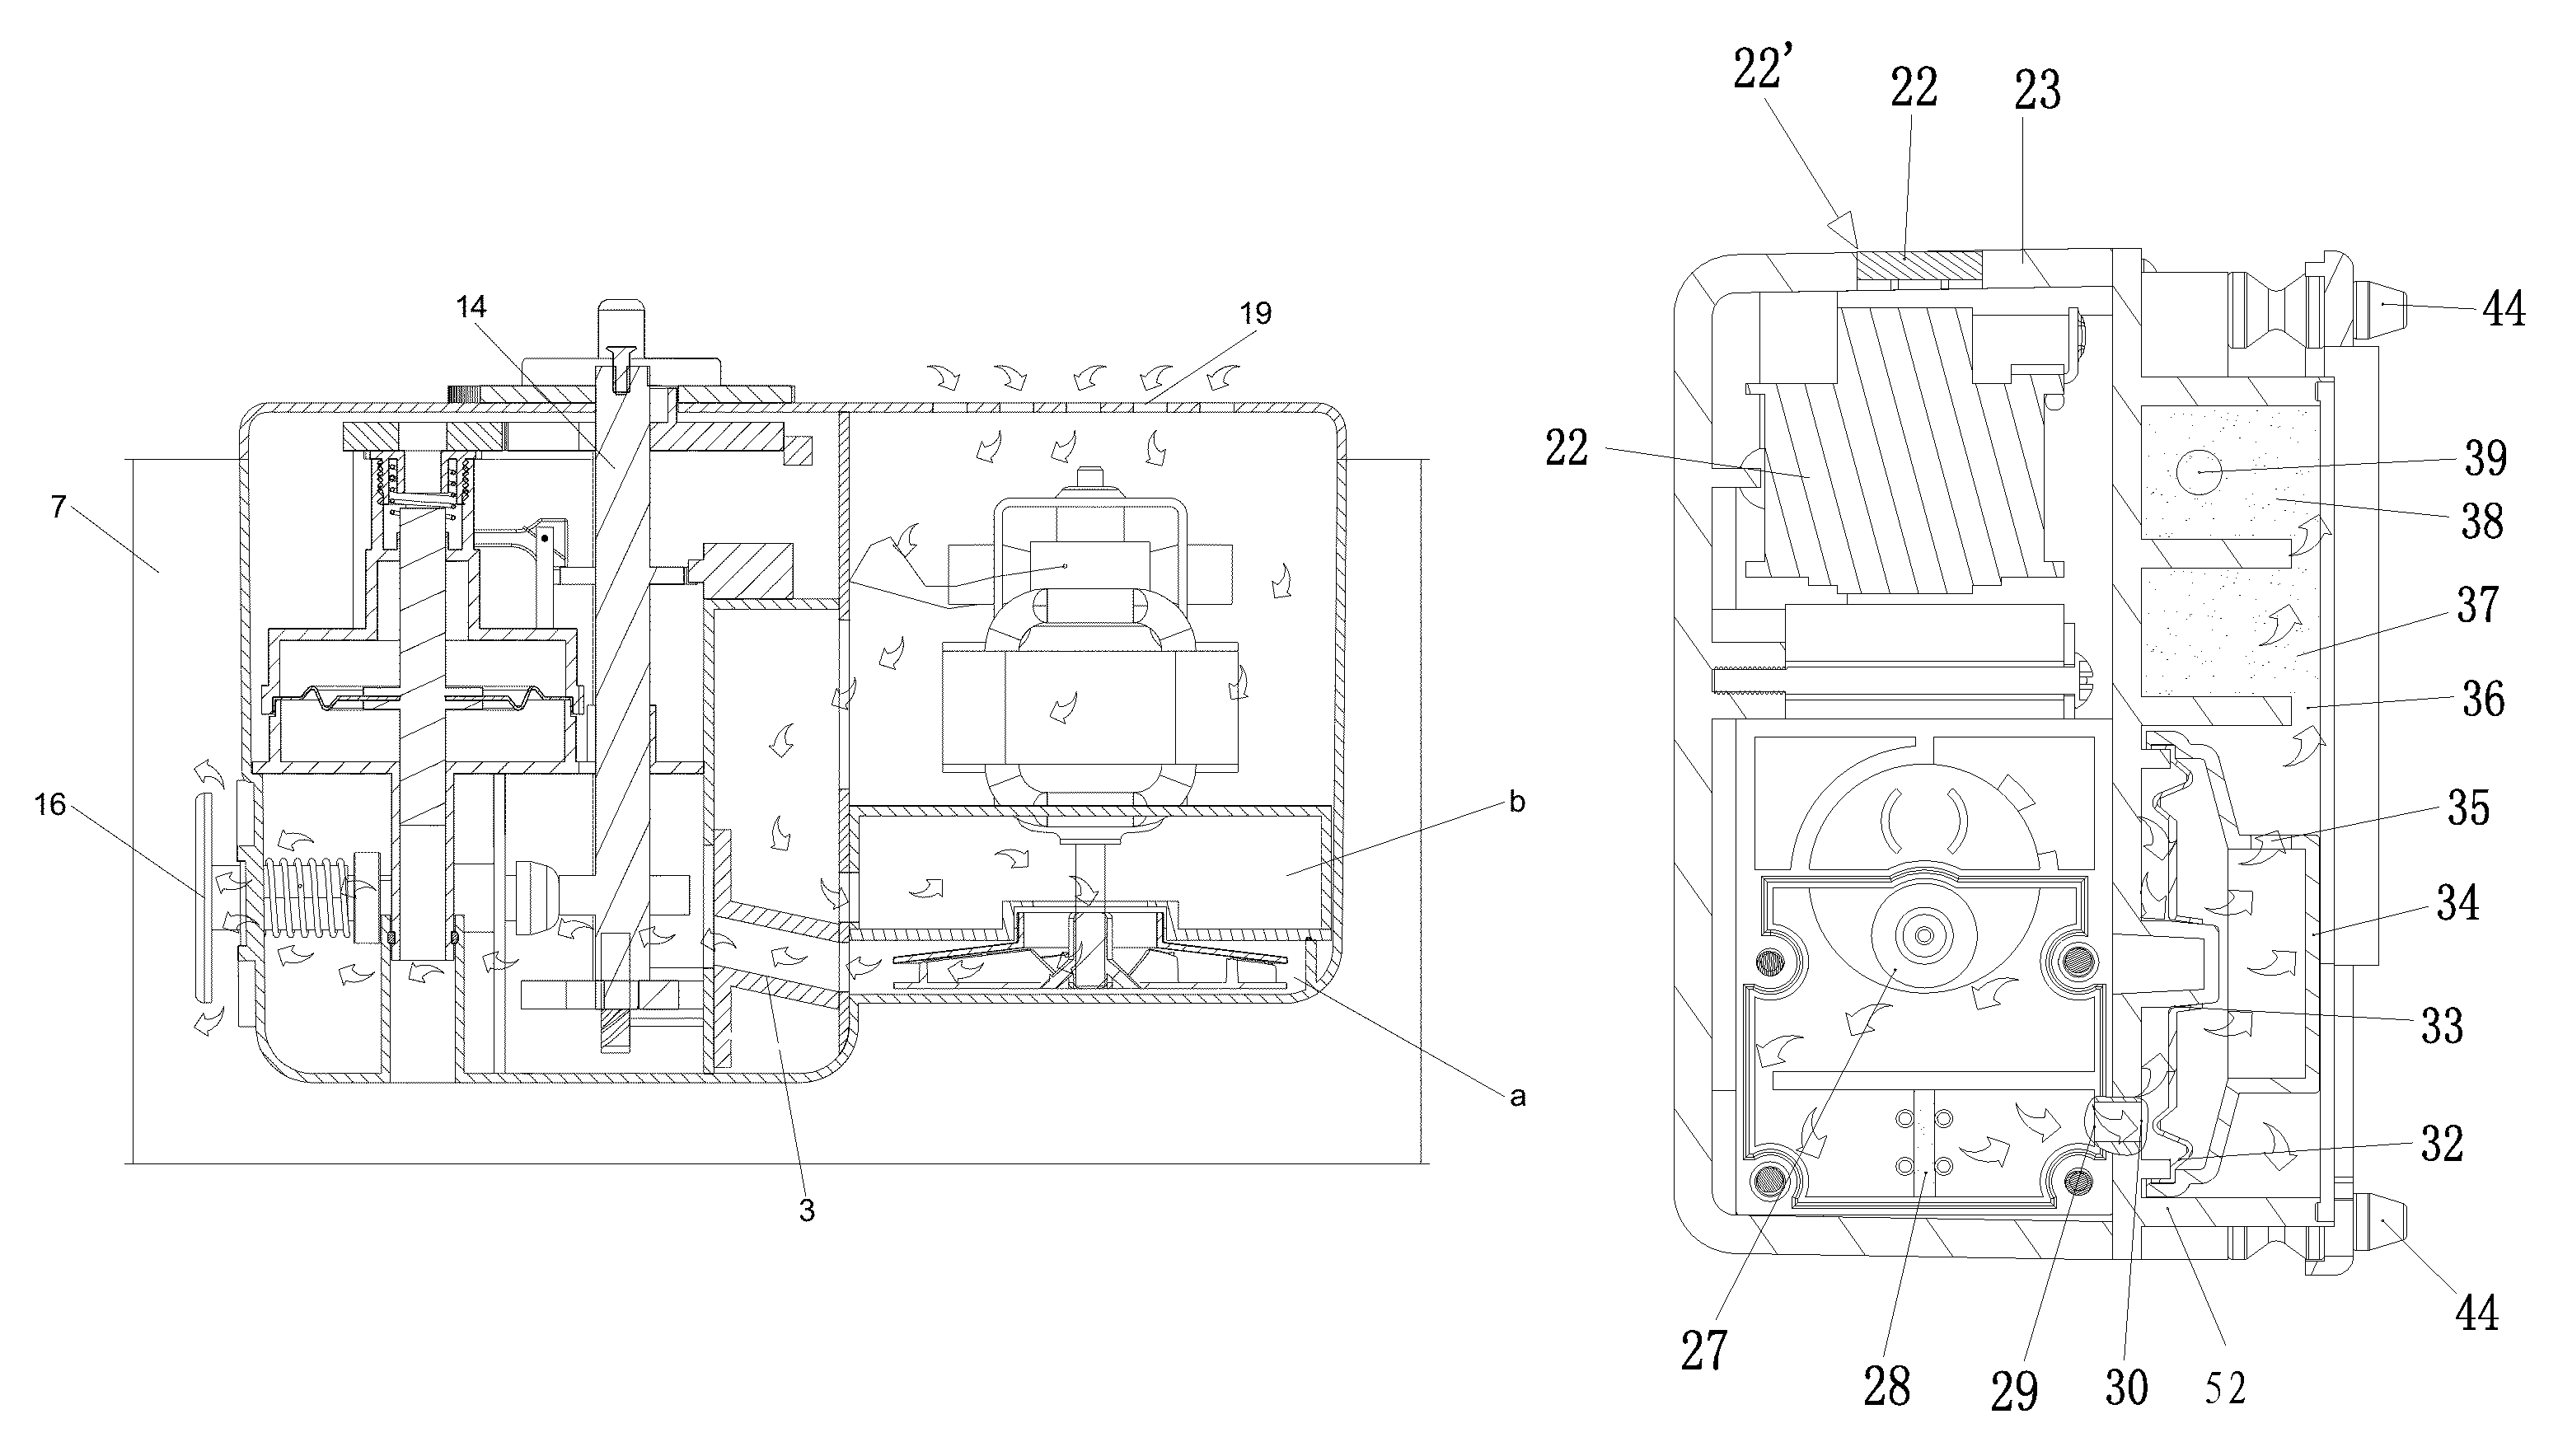 Inflating module for use with an inflatable object